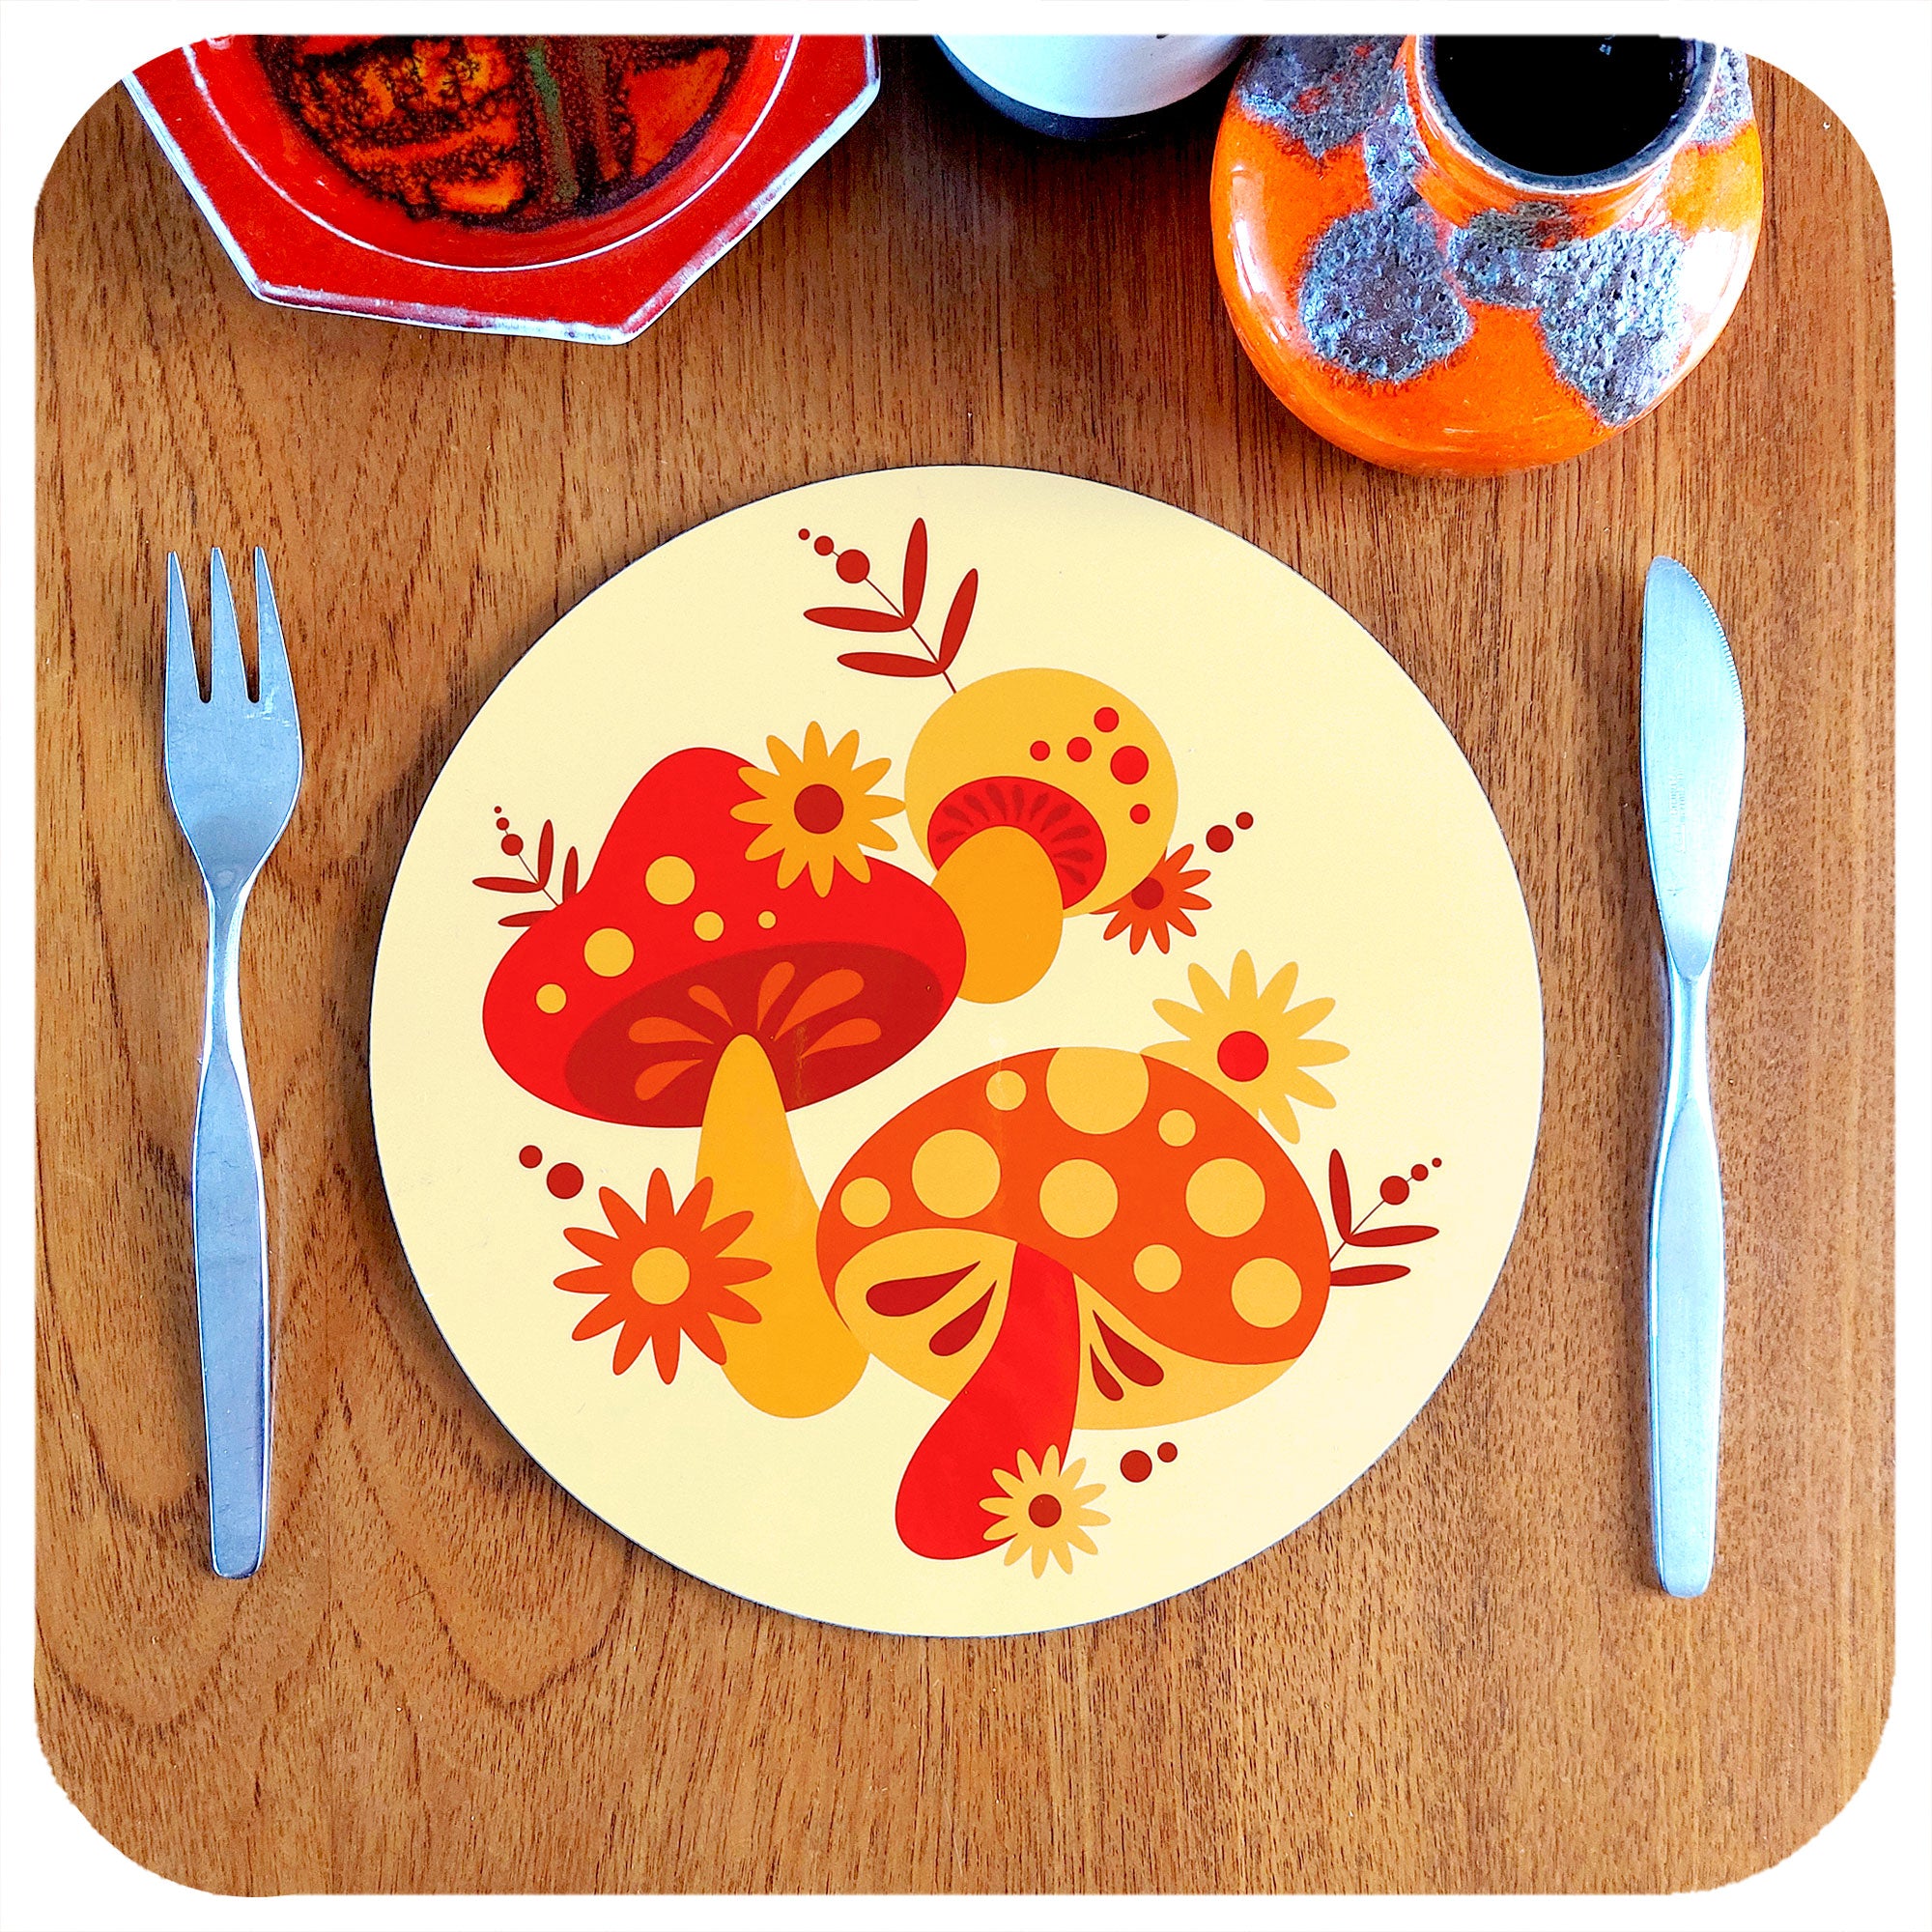 Retro Mushrooms Round Placemat sits on a teak table with knife and fork, plus vintage pottery pieces | The Inkabilly Emporium